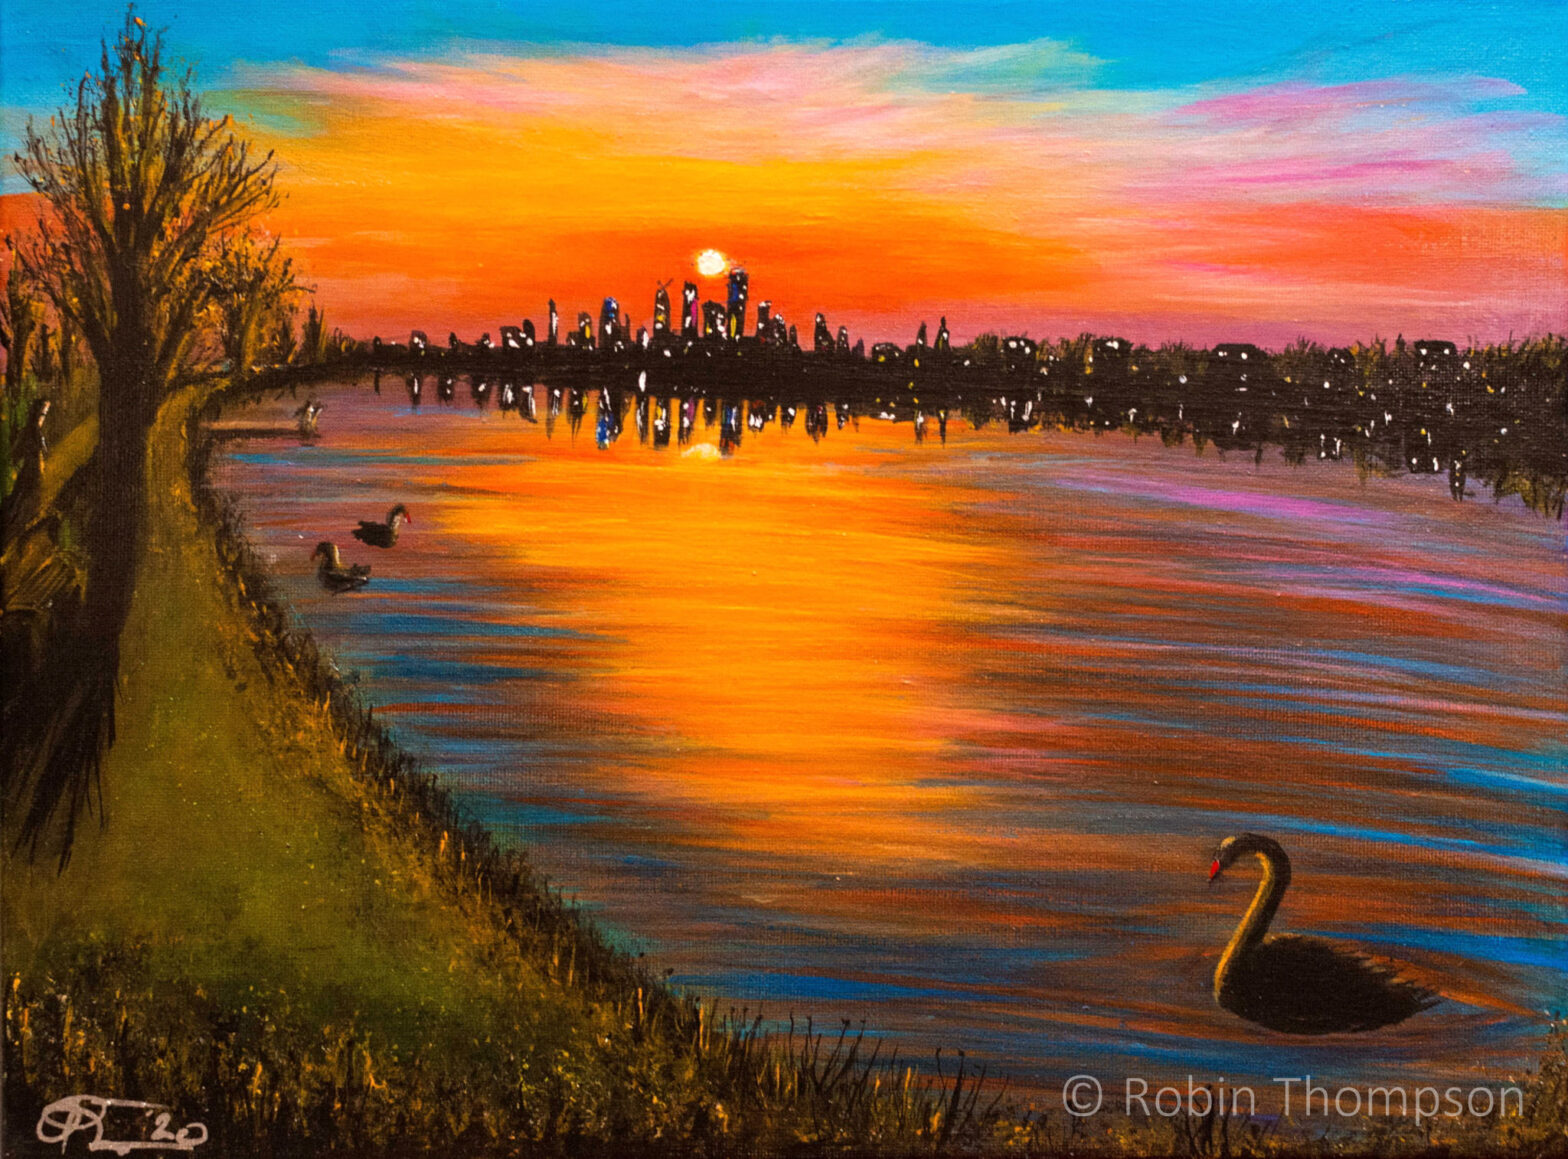 Colourful acrylic painting showing a lakeside view of a sunset, with city buildings (Melbourne/Naarm) in the background. A swan in the foreground is shown, and emotive, primary colours bring a vibrancy to the scene.